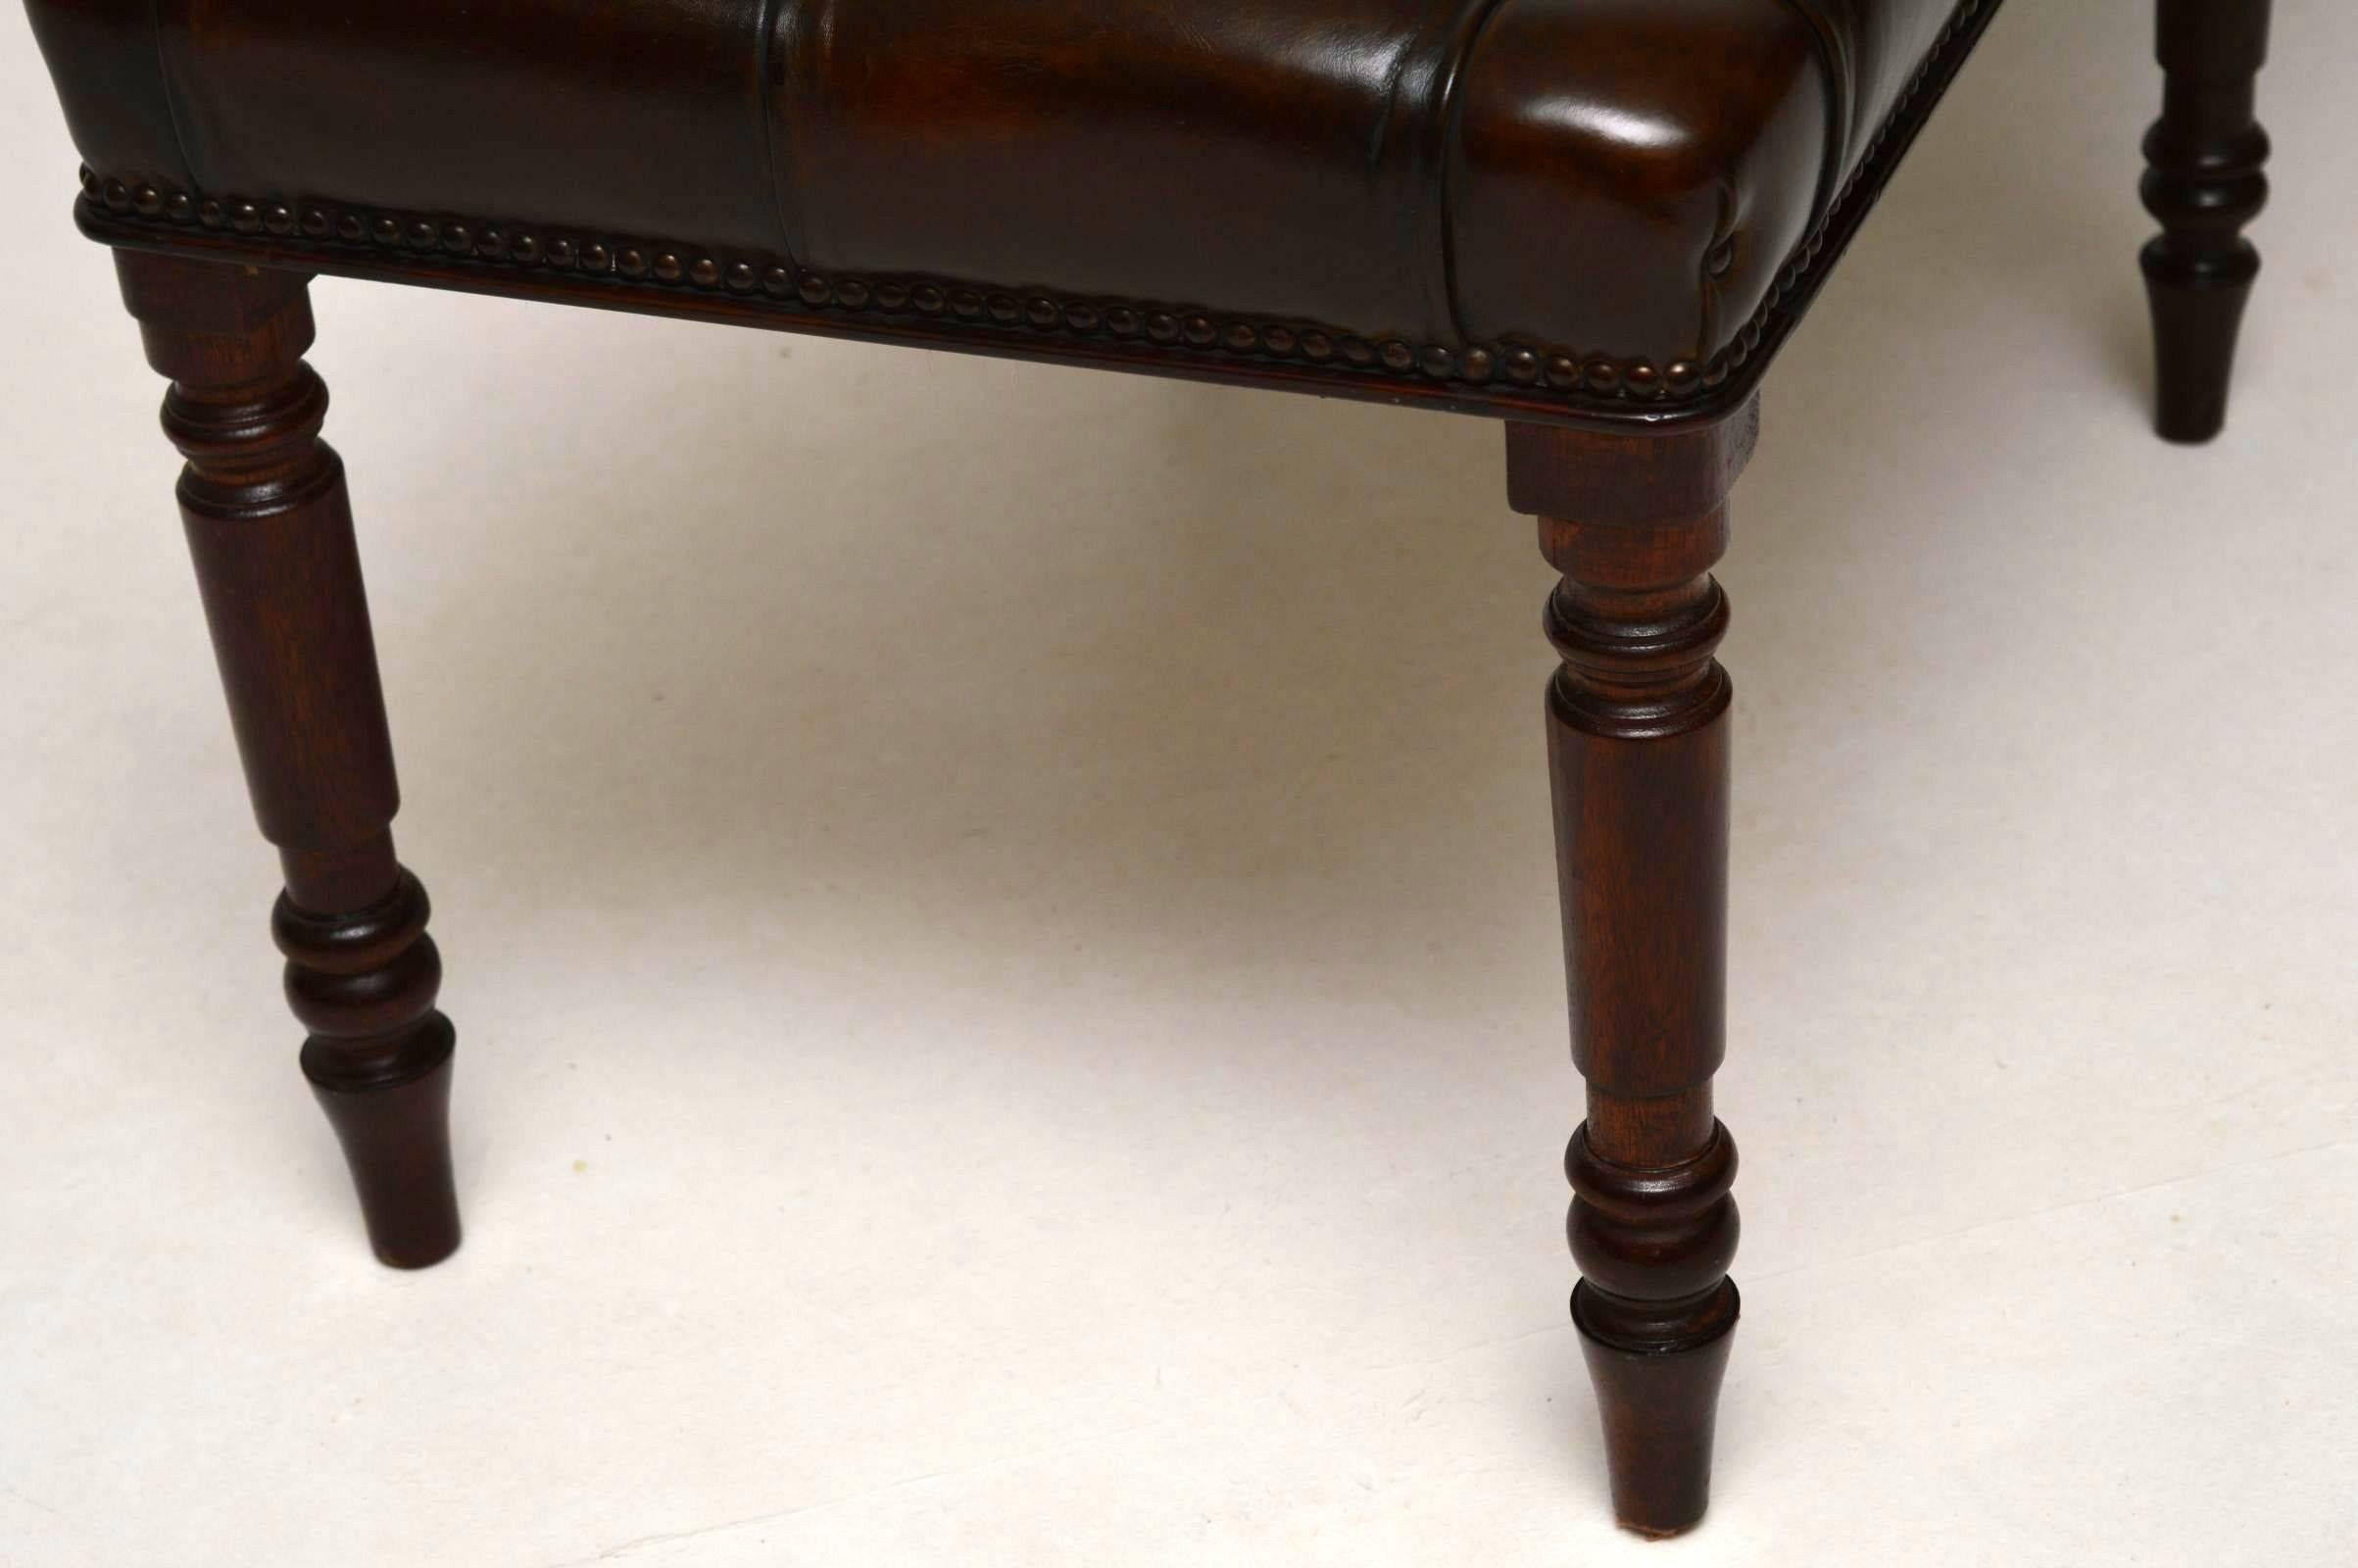 Adapted antique deep buttoned leather upholstered stool on a mahogany frame with six turned mahogany legs. This stool has been completely hand made in four stages. The frame and legs were built by my cabinet maker, then it was hand French polished,